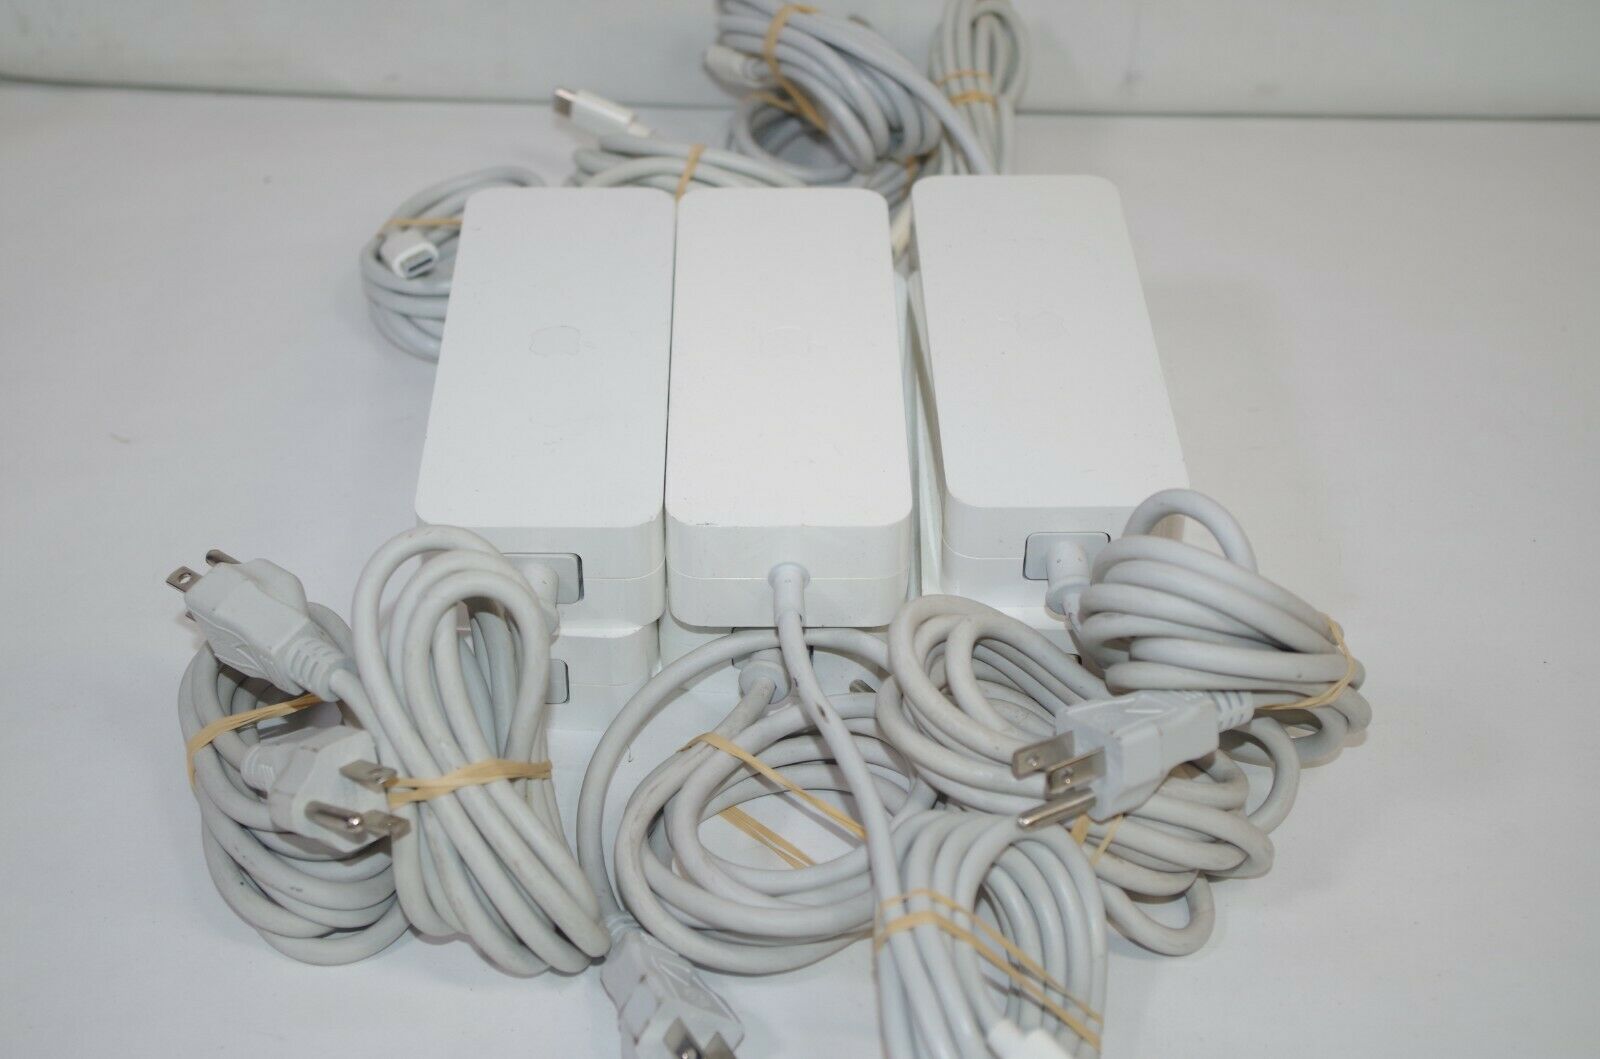 Lot of OEM Apple A1188 Mac Mini 110W Power Supply Adapter Cord 18.5V 6.0A MPN: Does Not Apply Voltage: 18.5 V Max. O